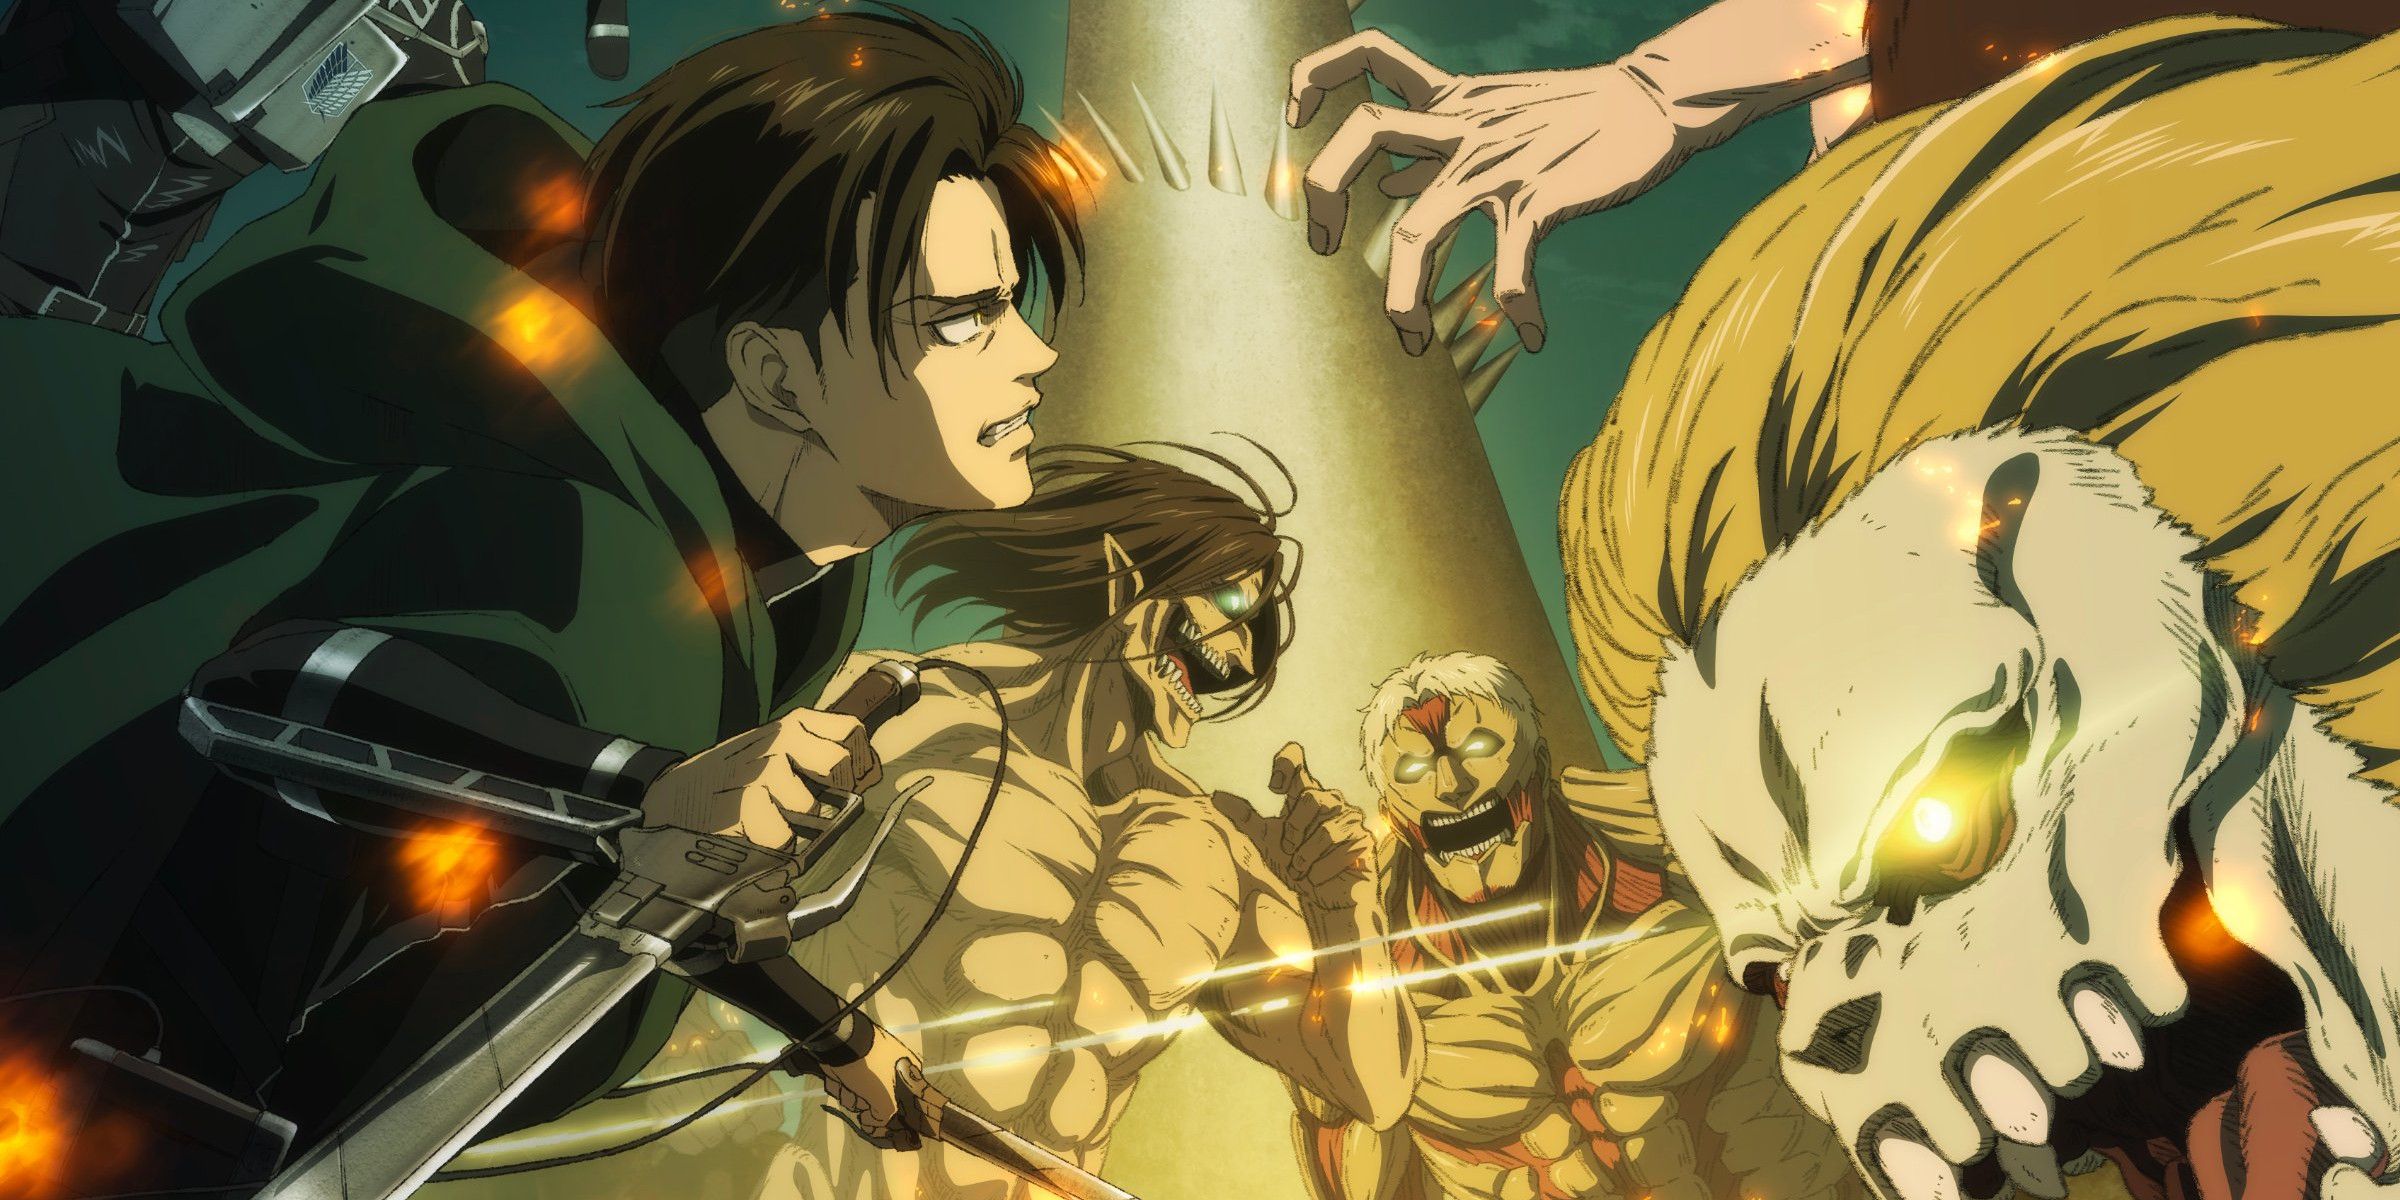 Attack on Titan’s Penultimate Episode Cliffhanger Leaves Two Lives at Stake